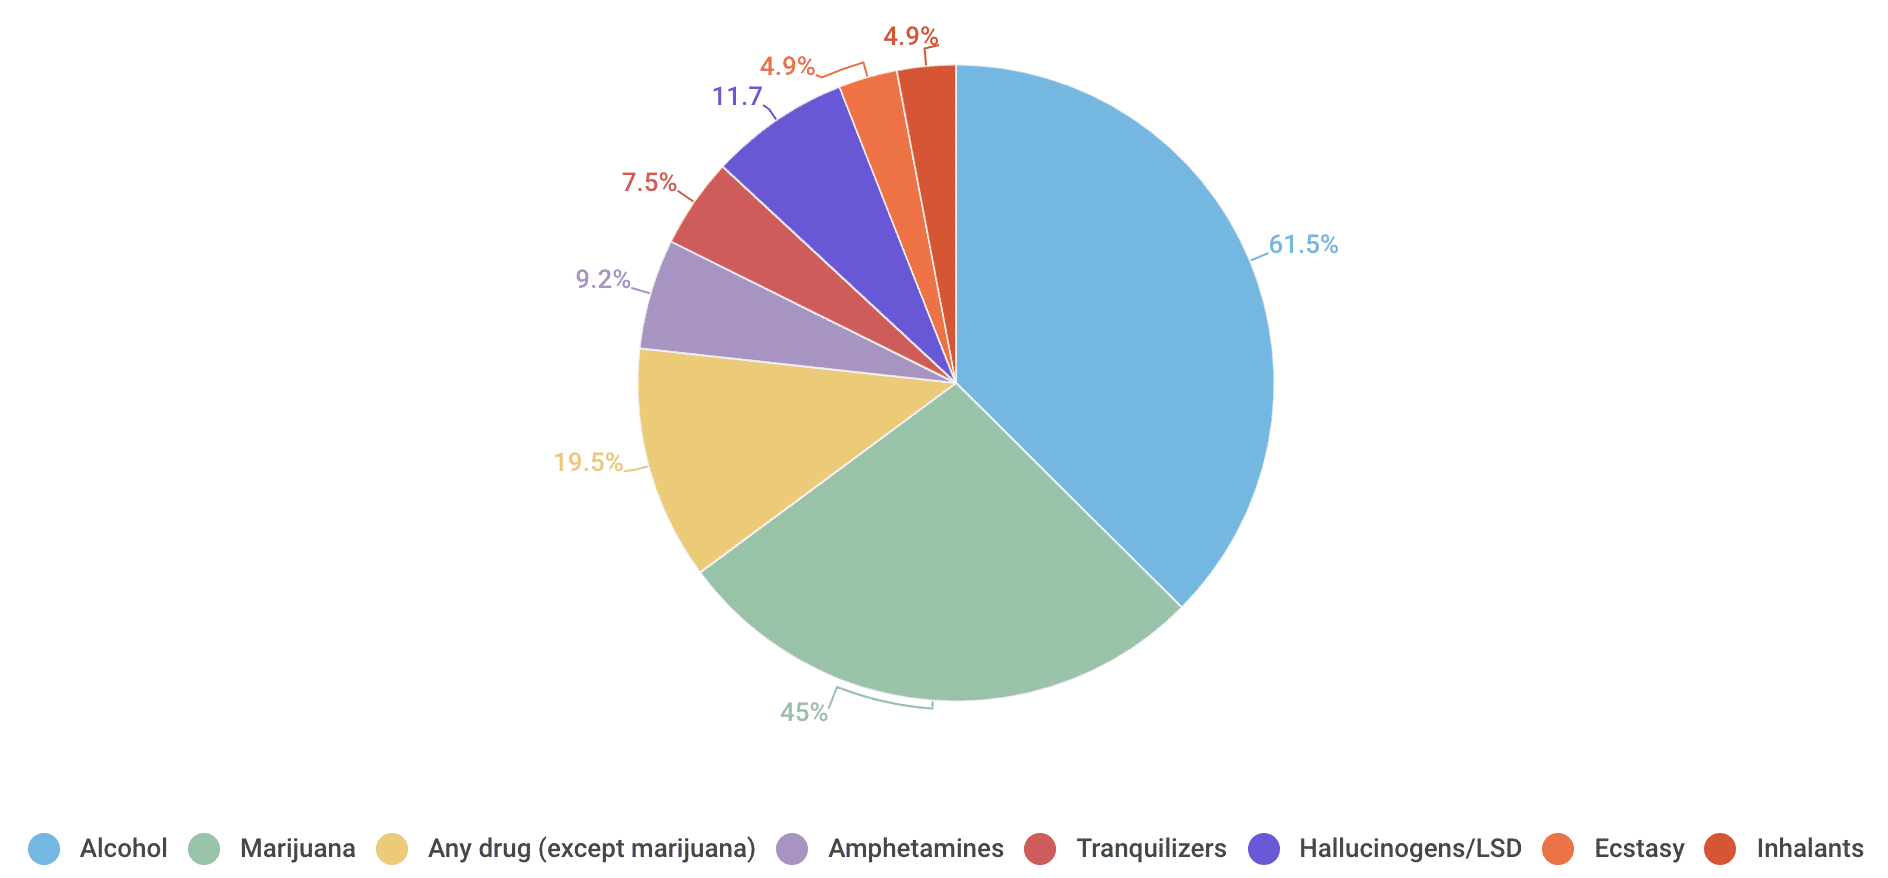 Pie chart of most commonly misused drugs